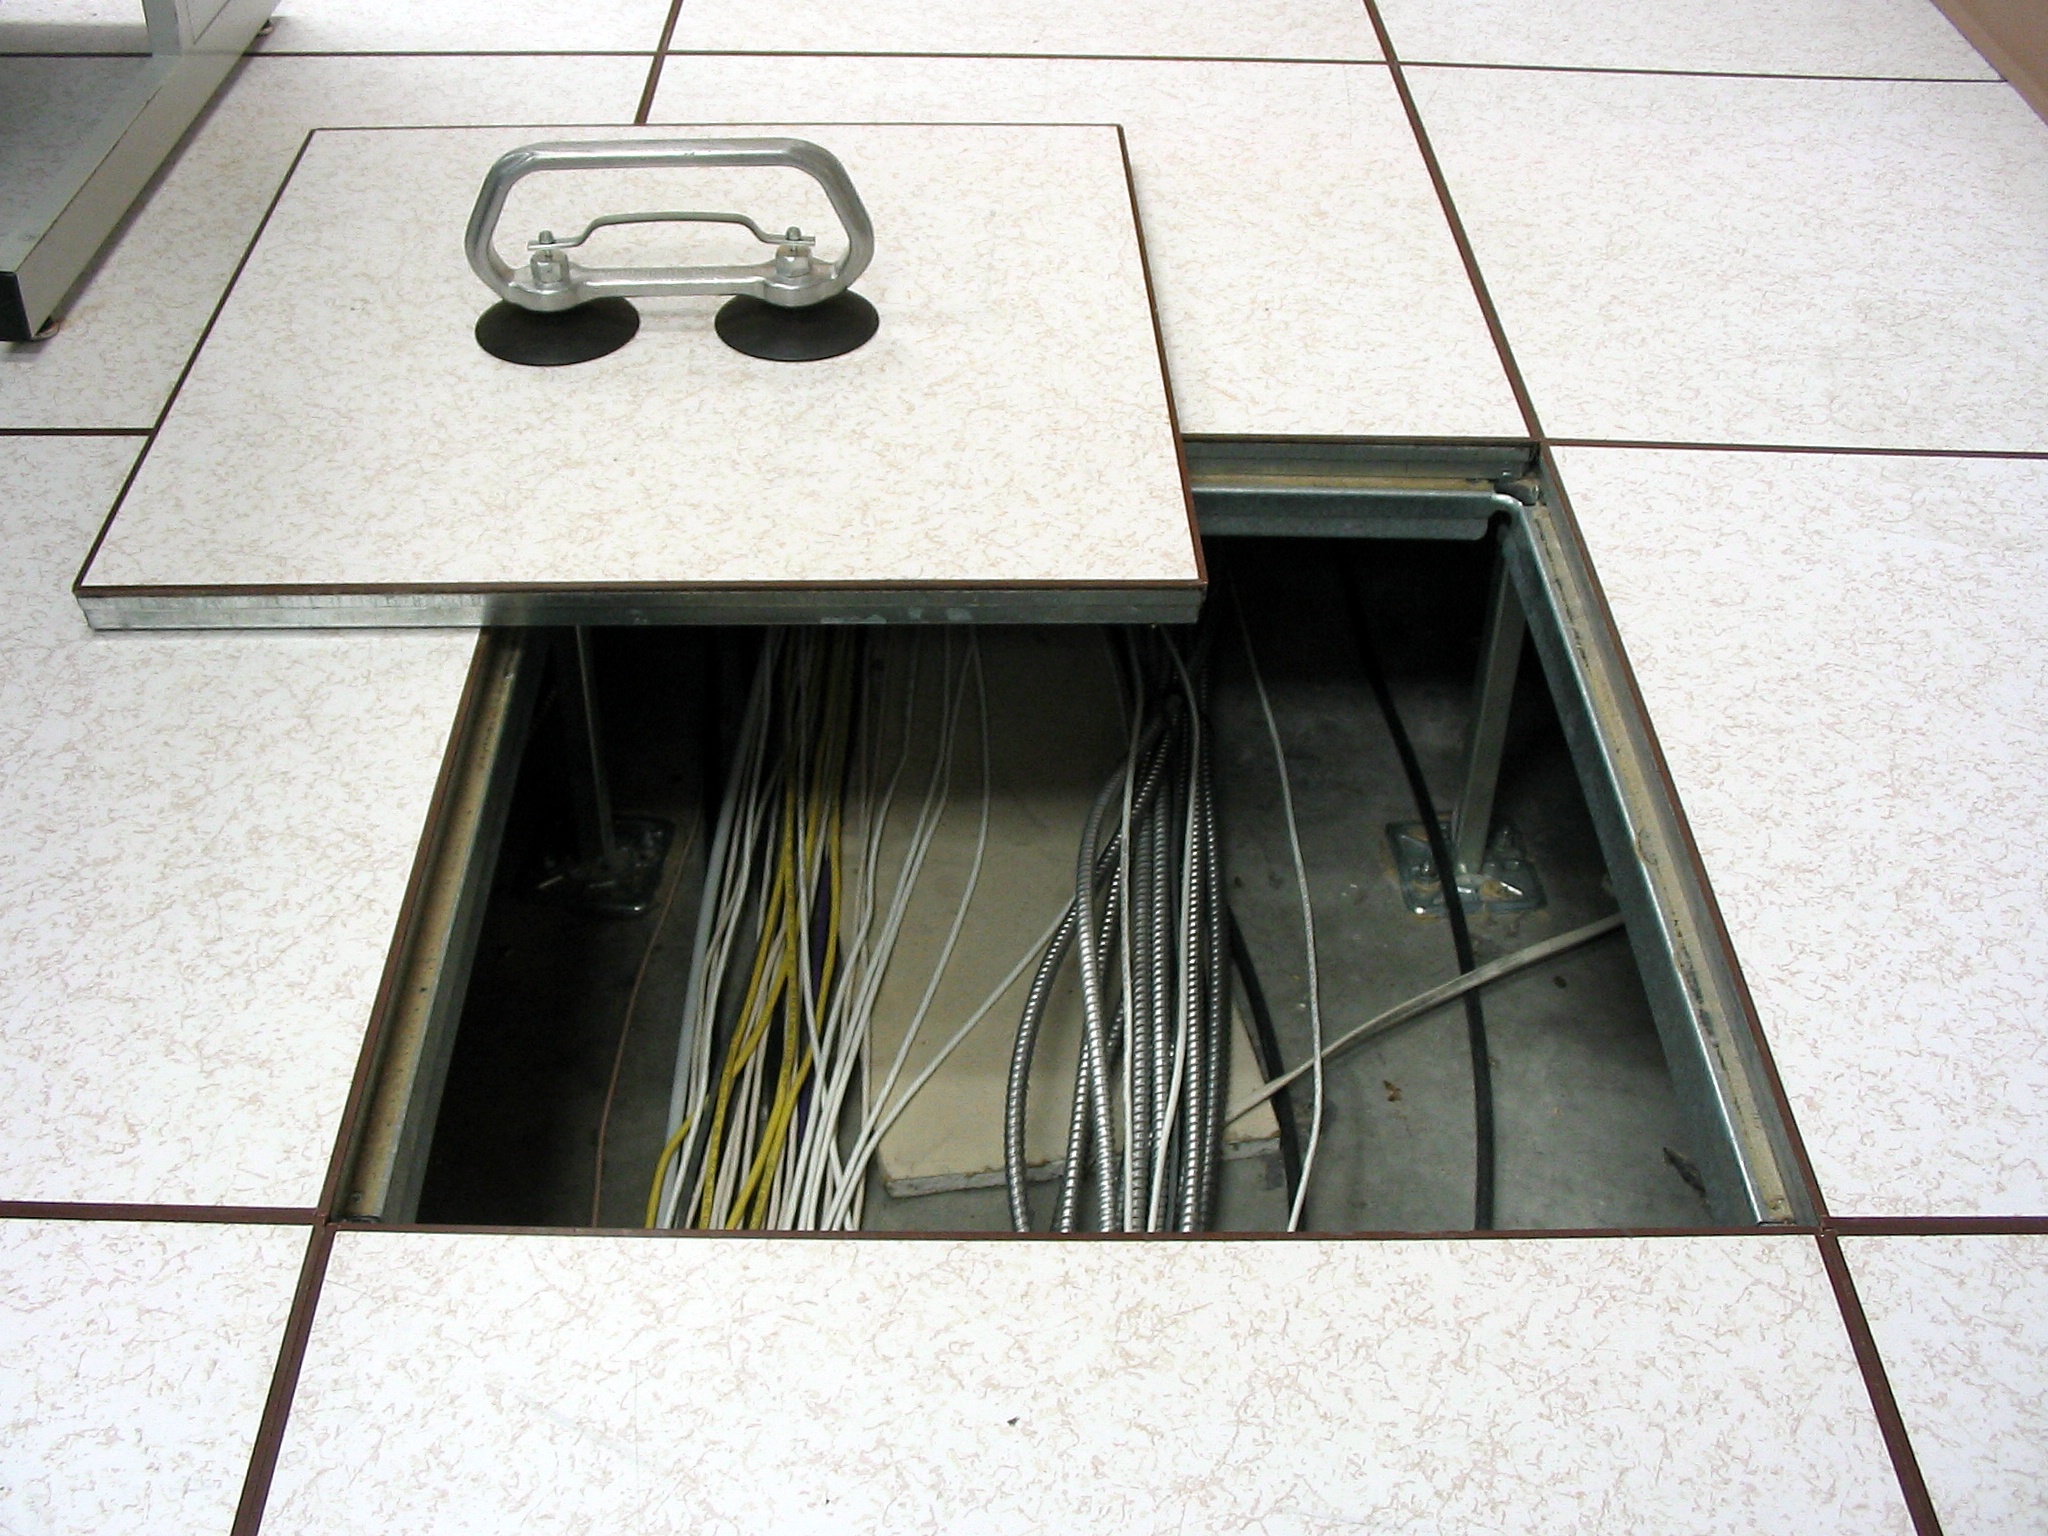 A raised section of computer floor